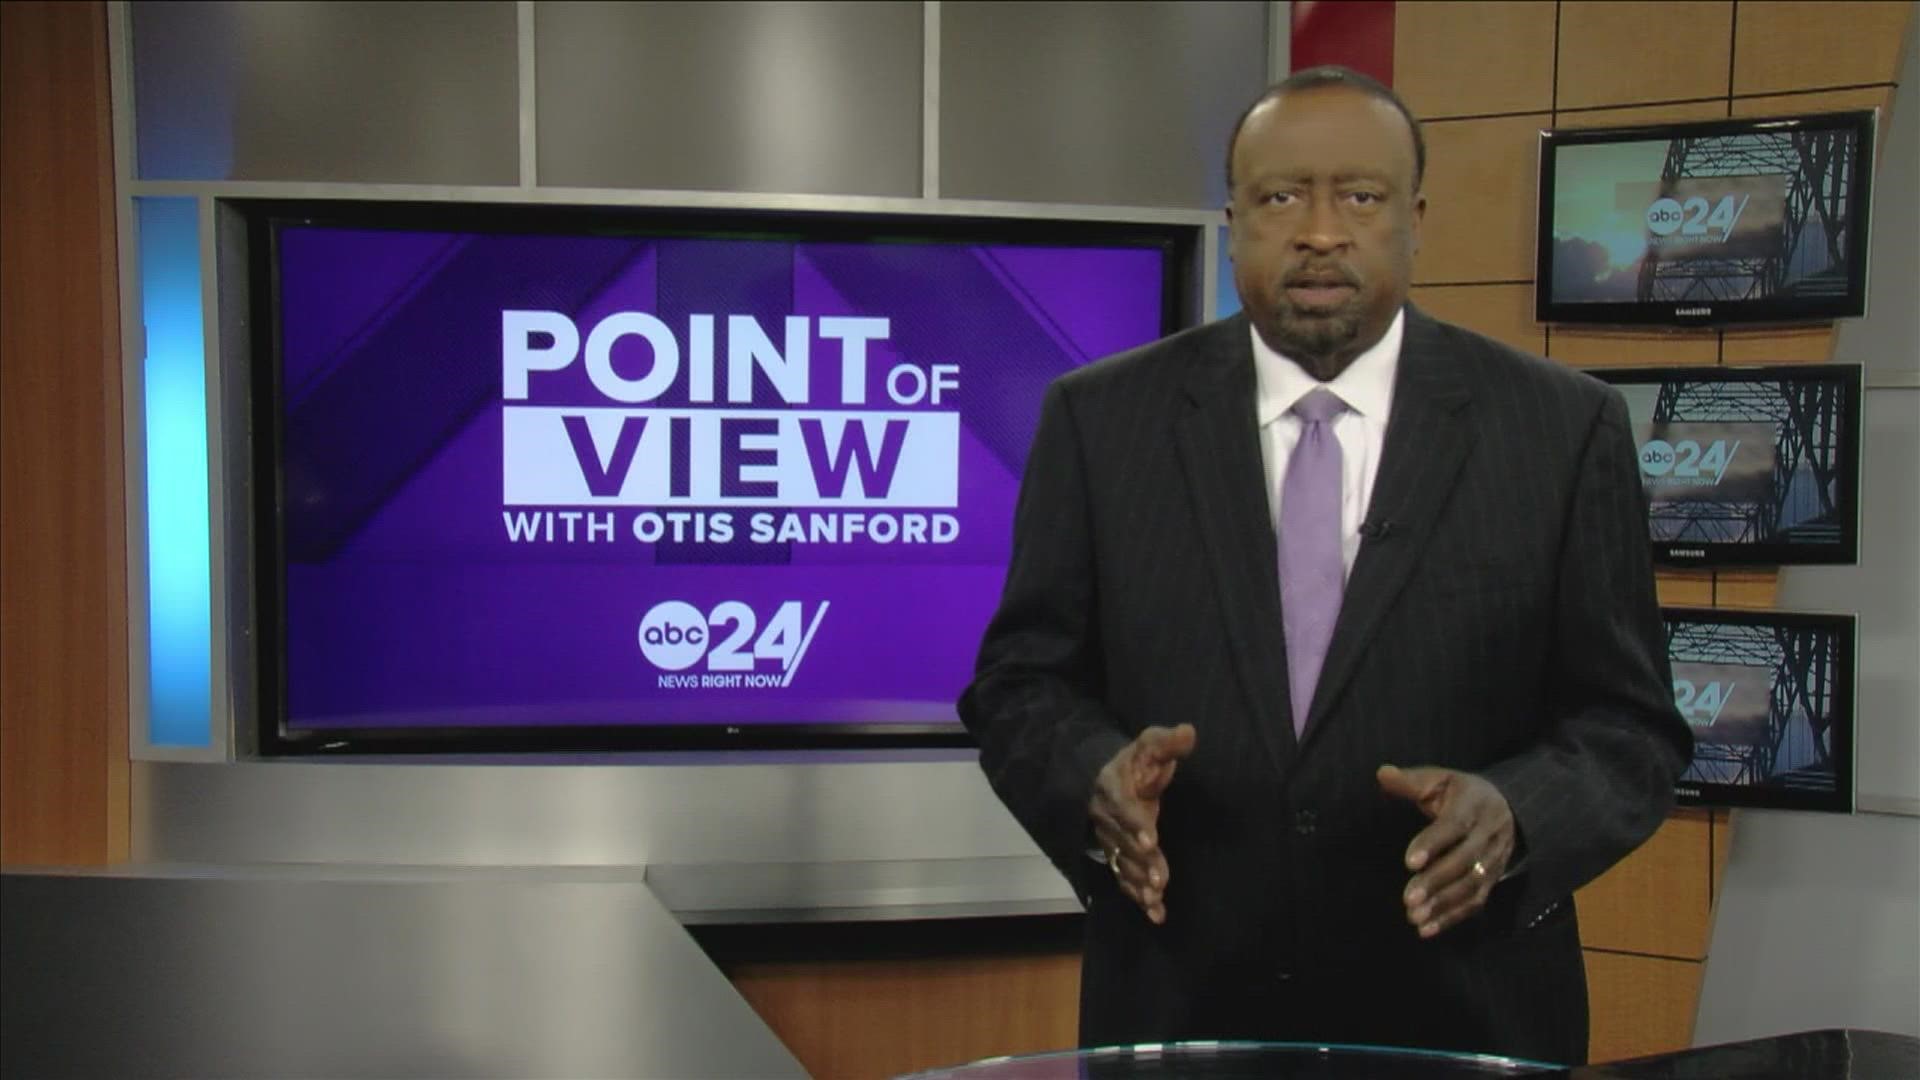 ABC24 Political Analyst Otis Sanford gives his Point of View on Mississippi's ongoing Supreme Court battle over abortion - which may see Roe v. Wade overturned.